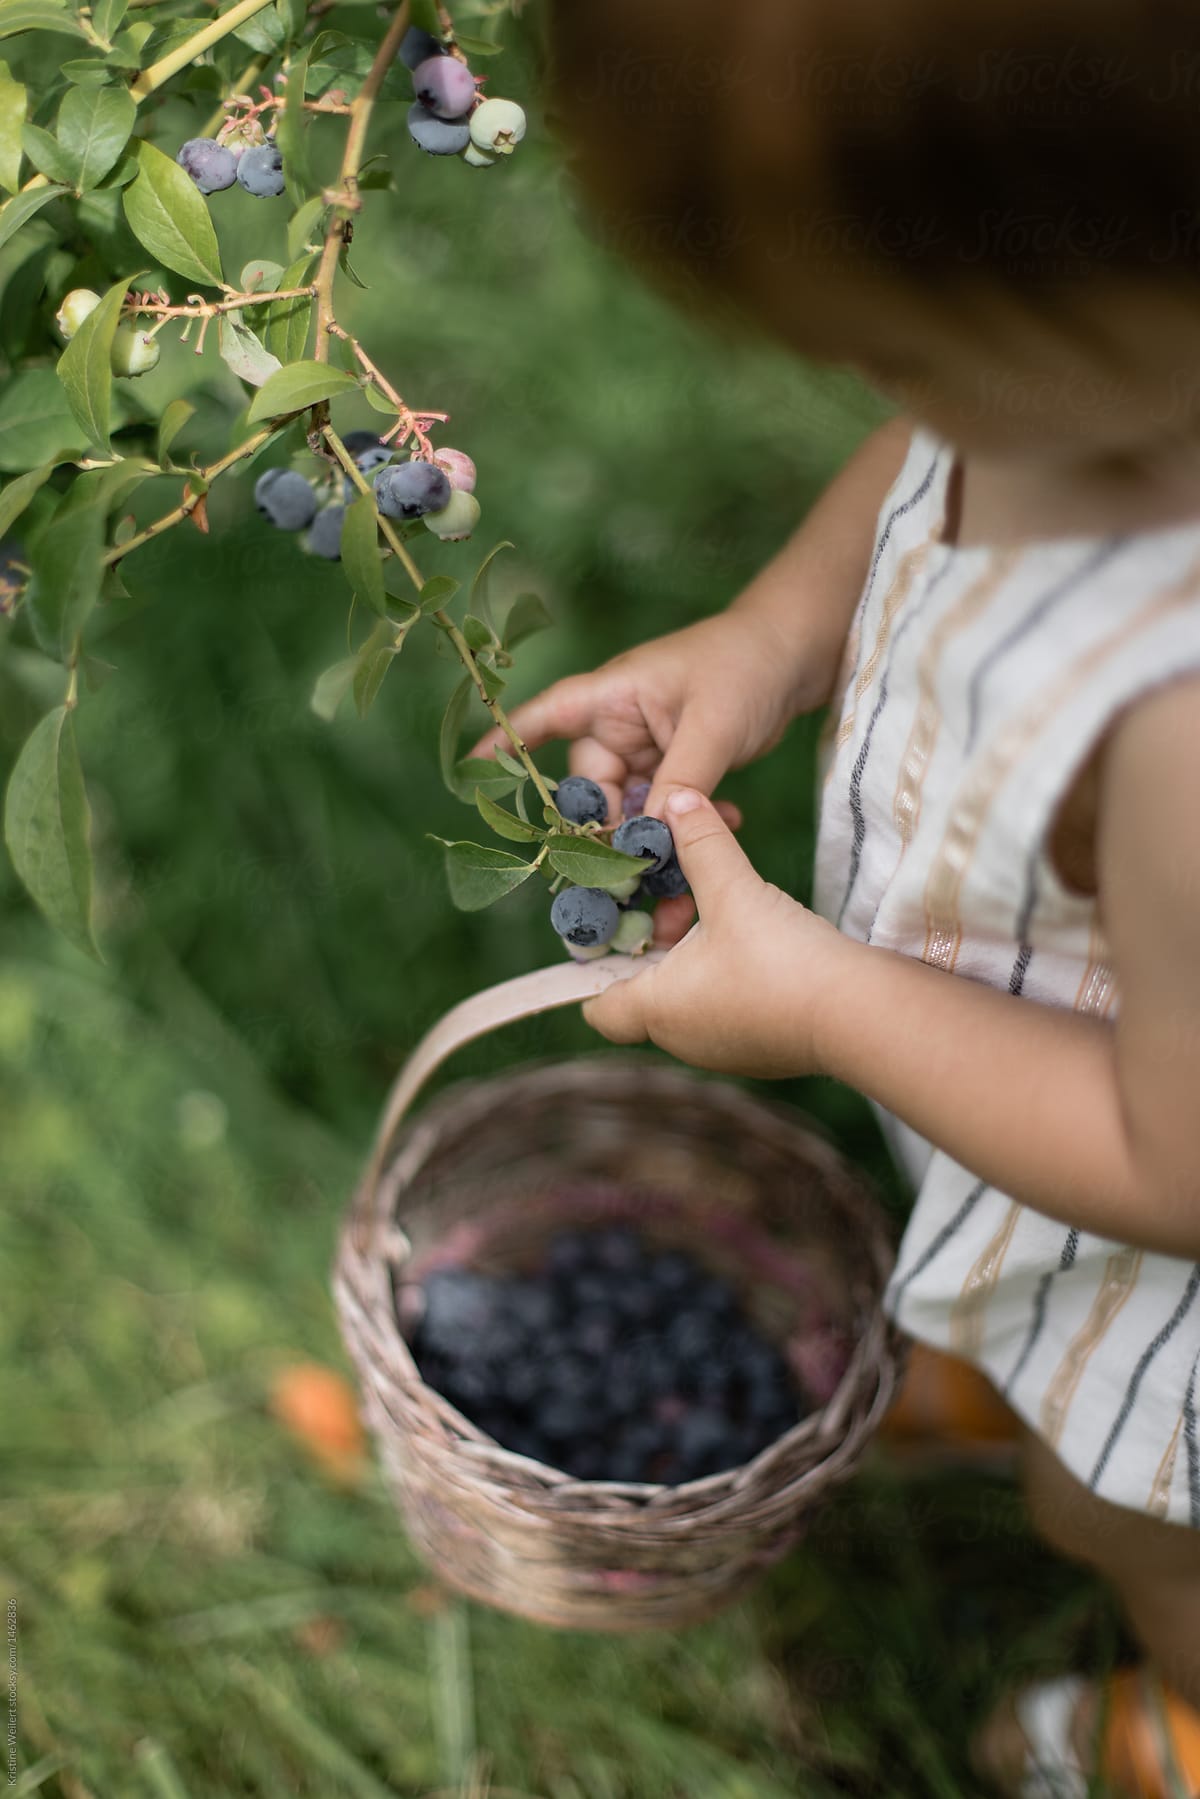 Young toddler picking blueberries